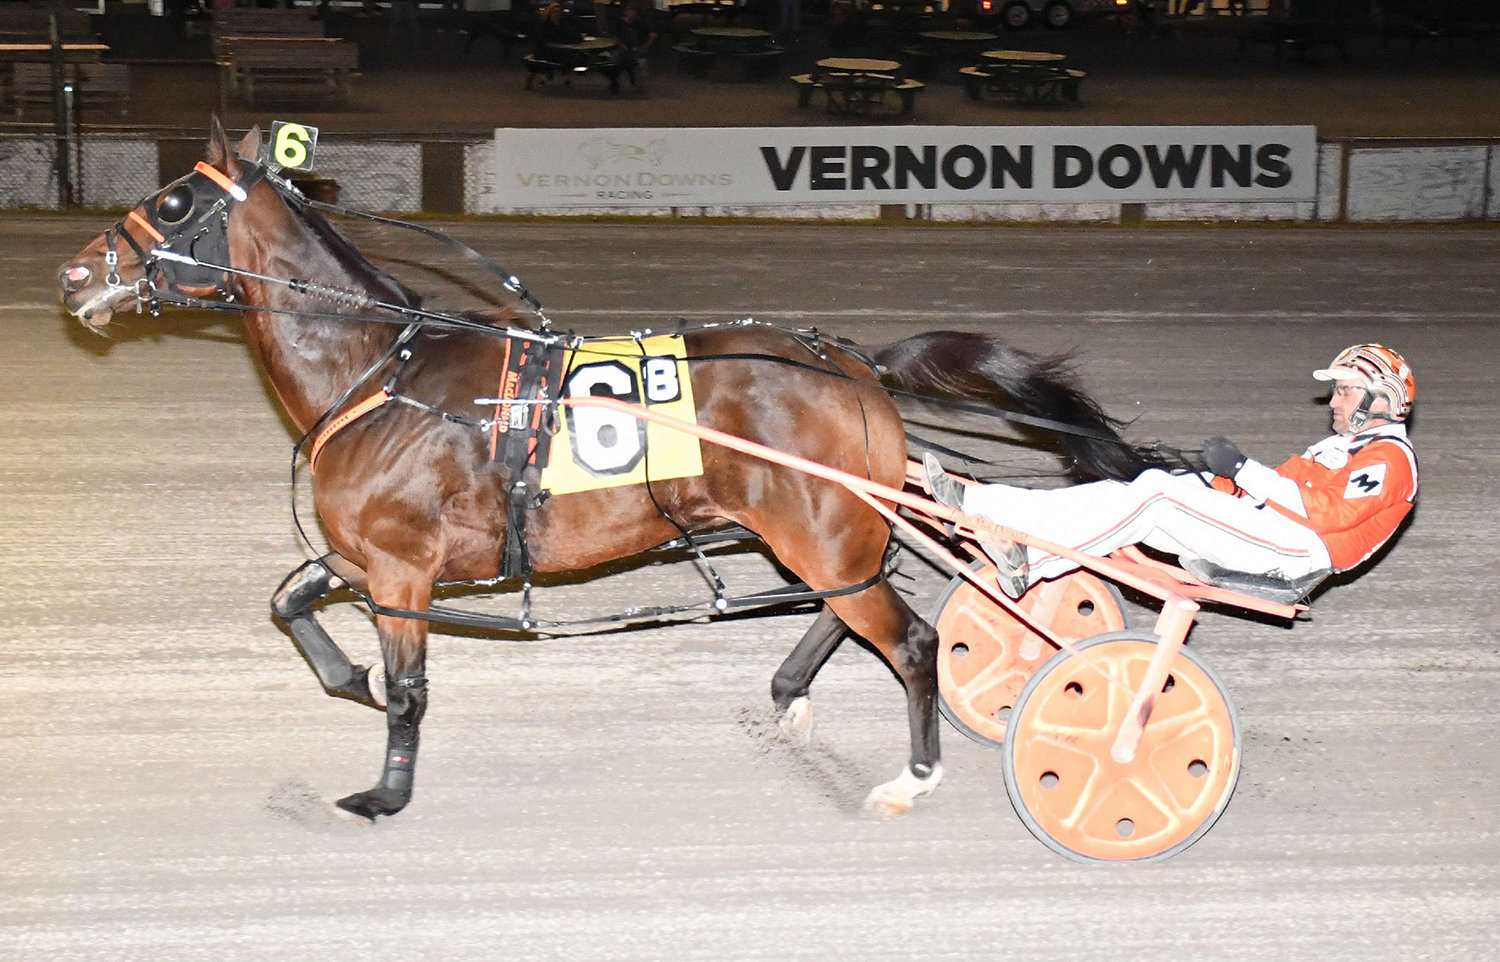 Sgt Papa Daddy and driver John MacDonald won the featured $8,700 trot at Vernon Downs on Saturday night in 1:52.3. It was the fifth win of the season for the 8-year-old gelding.